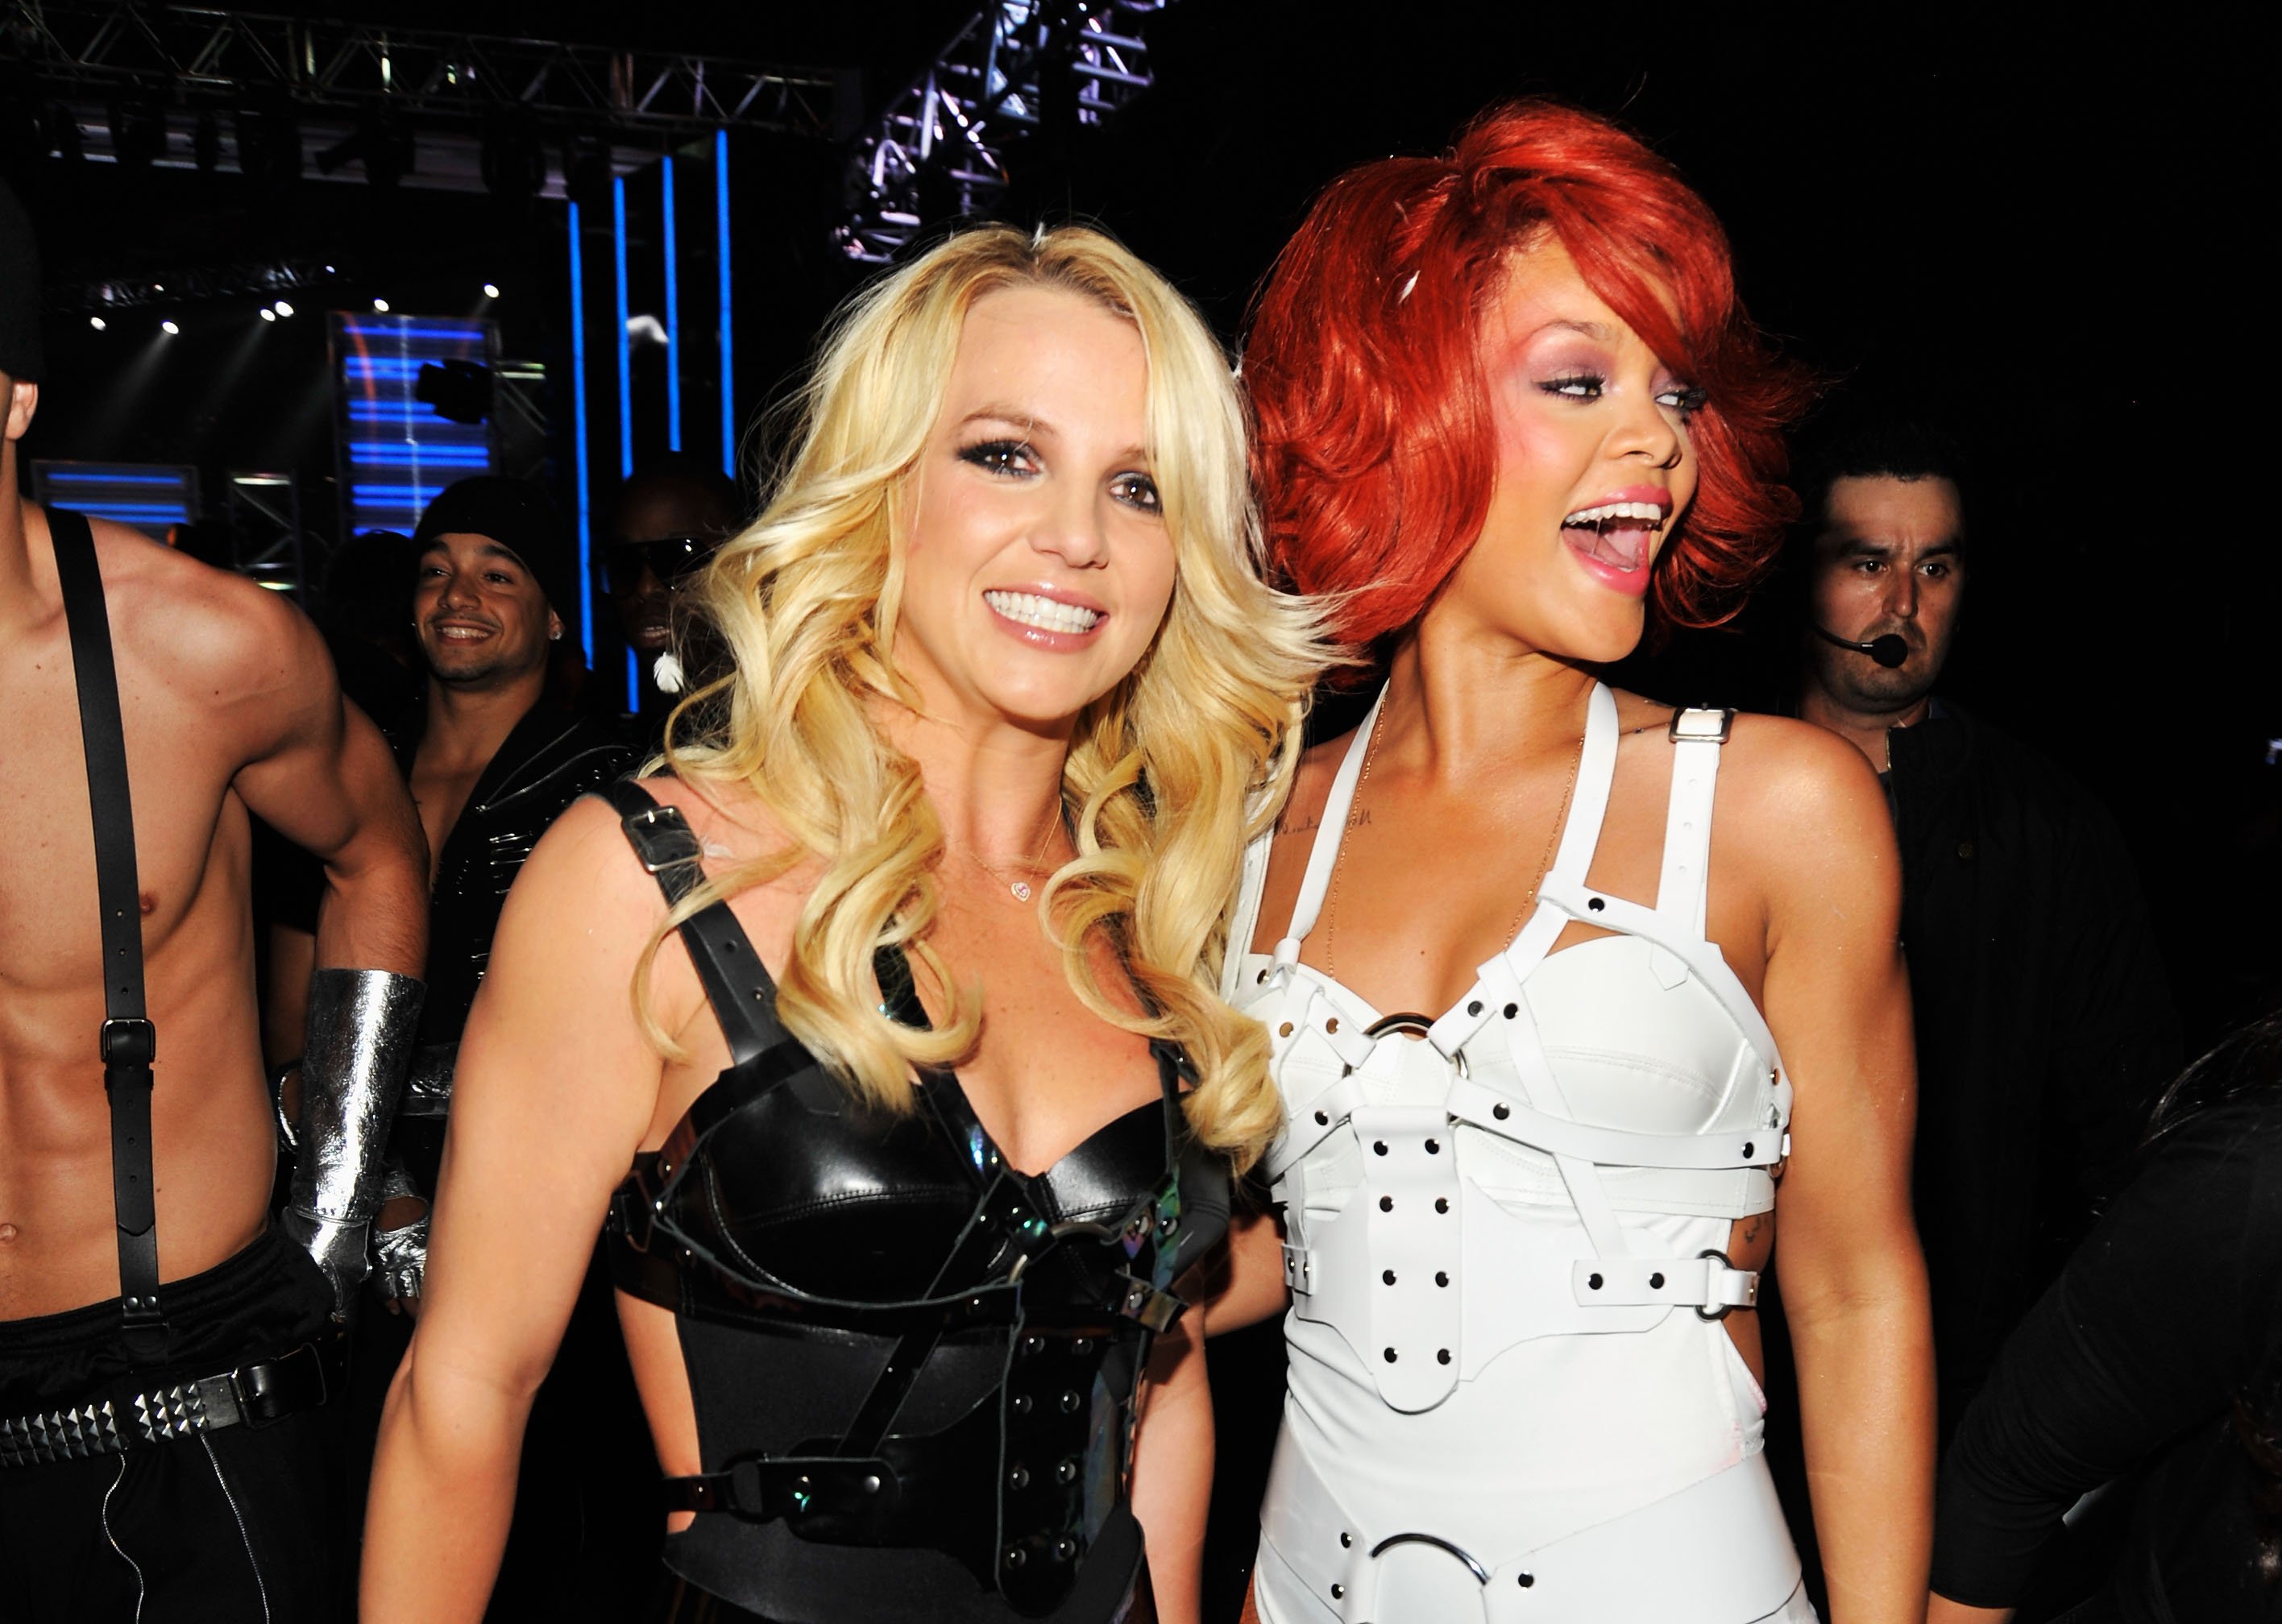 Britney Spears and Rihanna pose together for a picture after a performance.